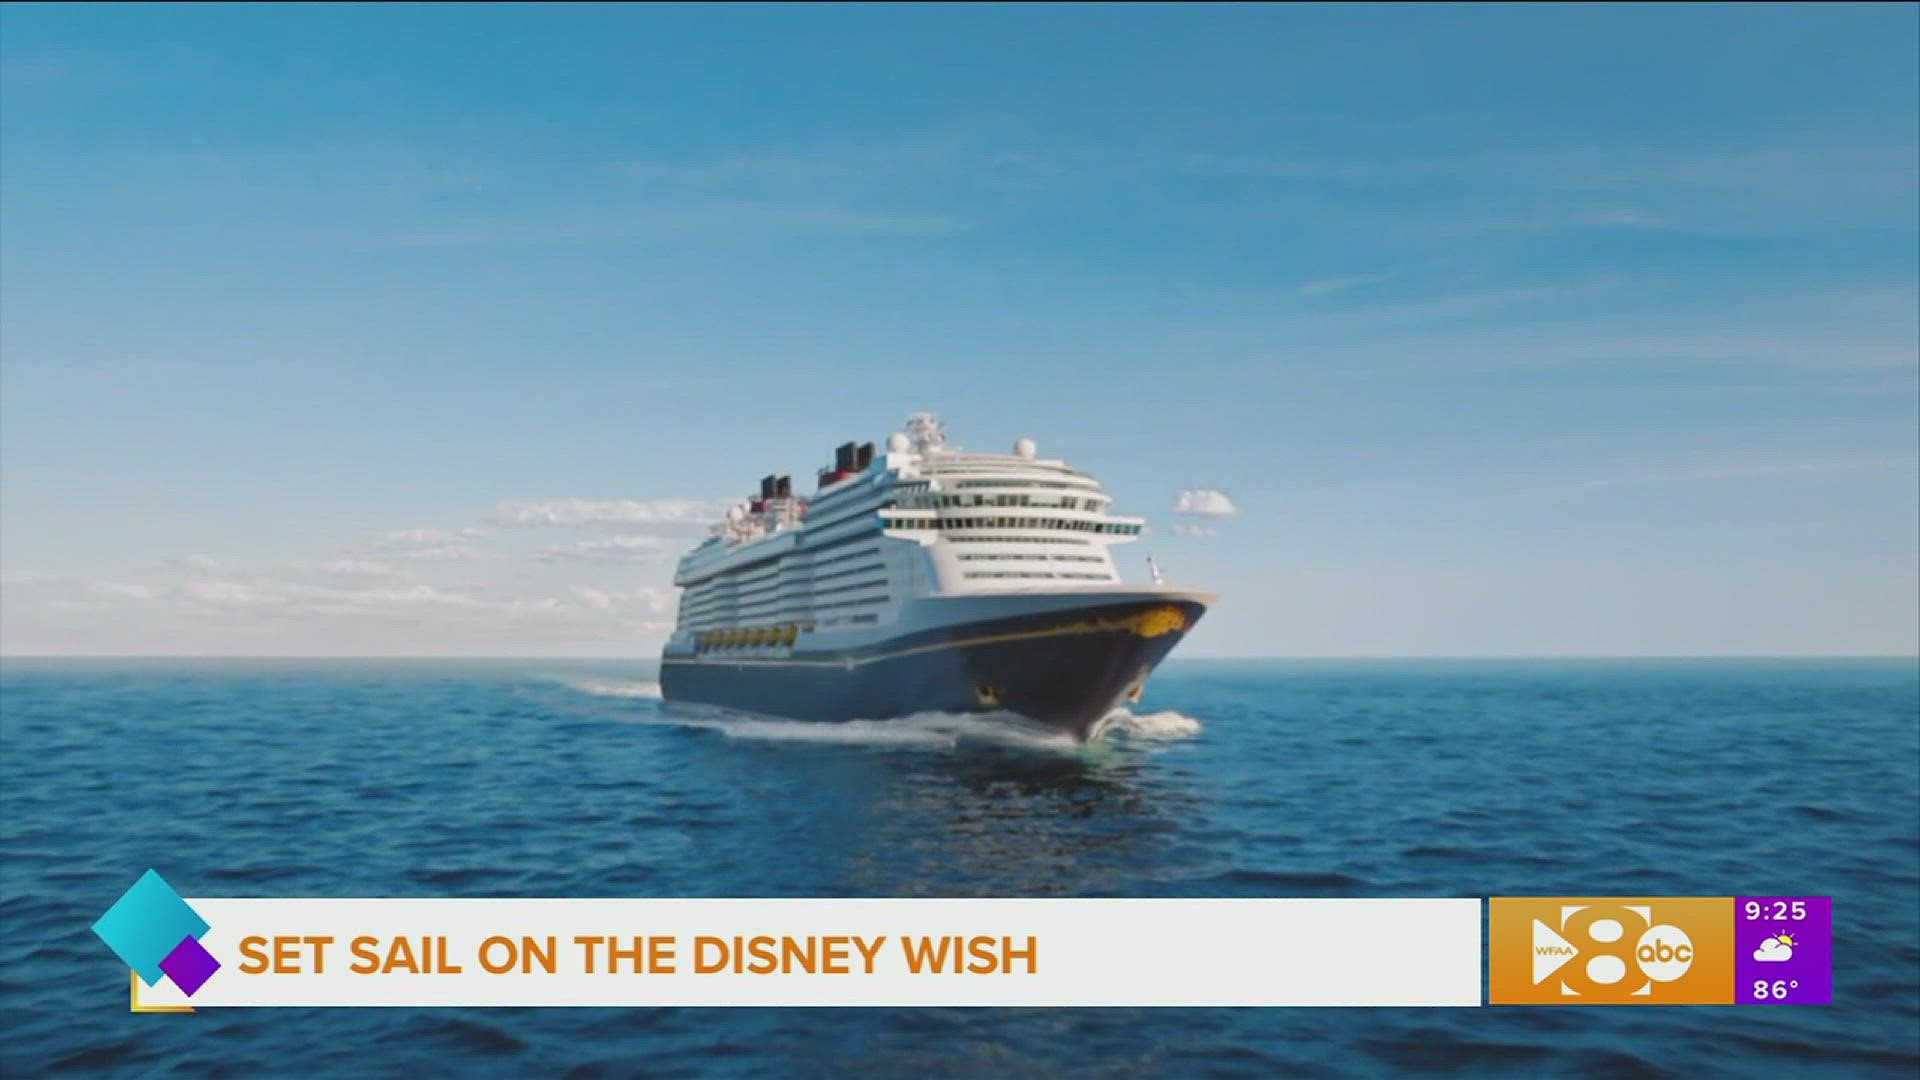 Wishing for a family vacation full of magic? Disney Cruise line just launched their newest cruise ship "Disney Wish," Hannah takes you along on her sneak peek.